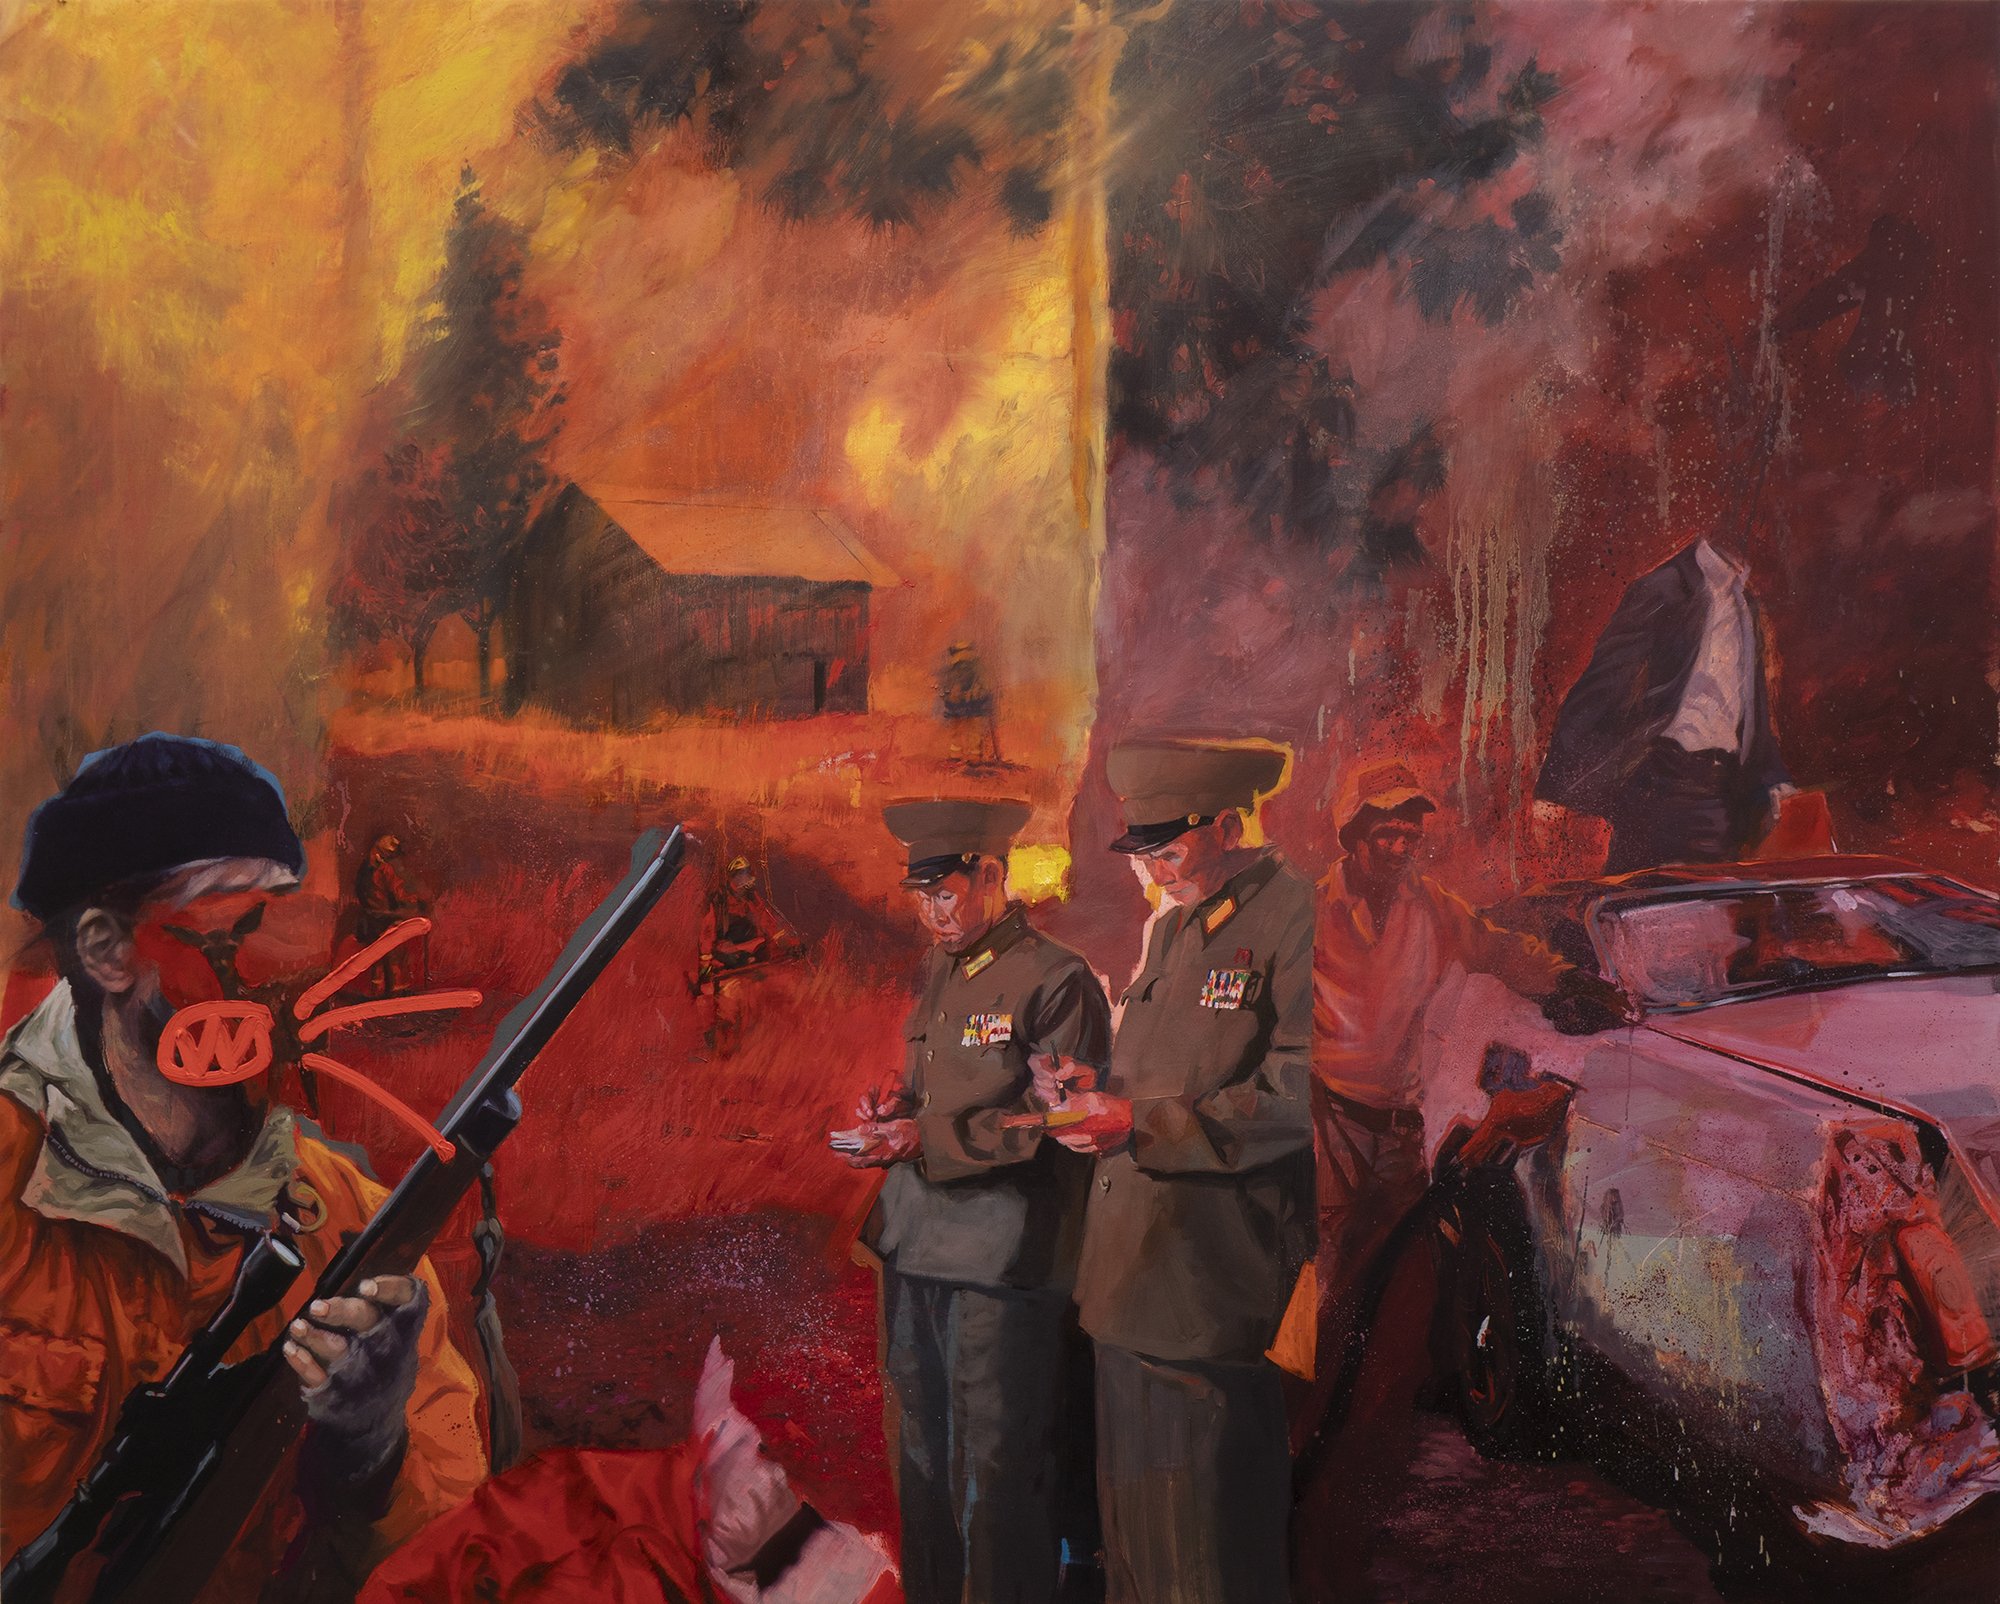 red threat, oil on linen stretched over cradled panel, 60 in. x 48 in., 2021